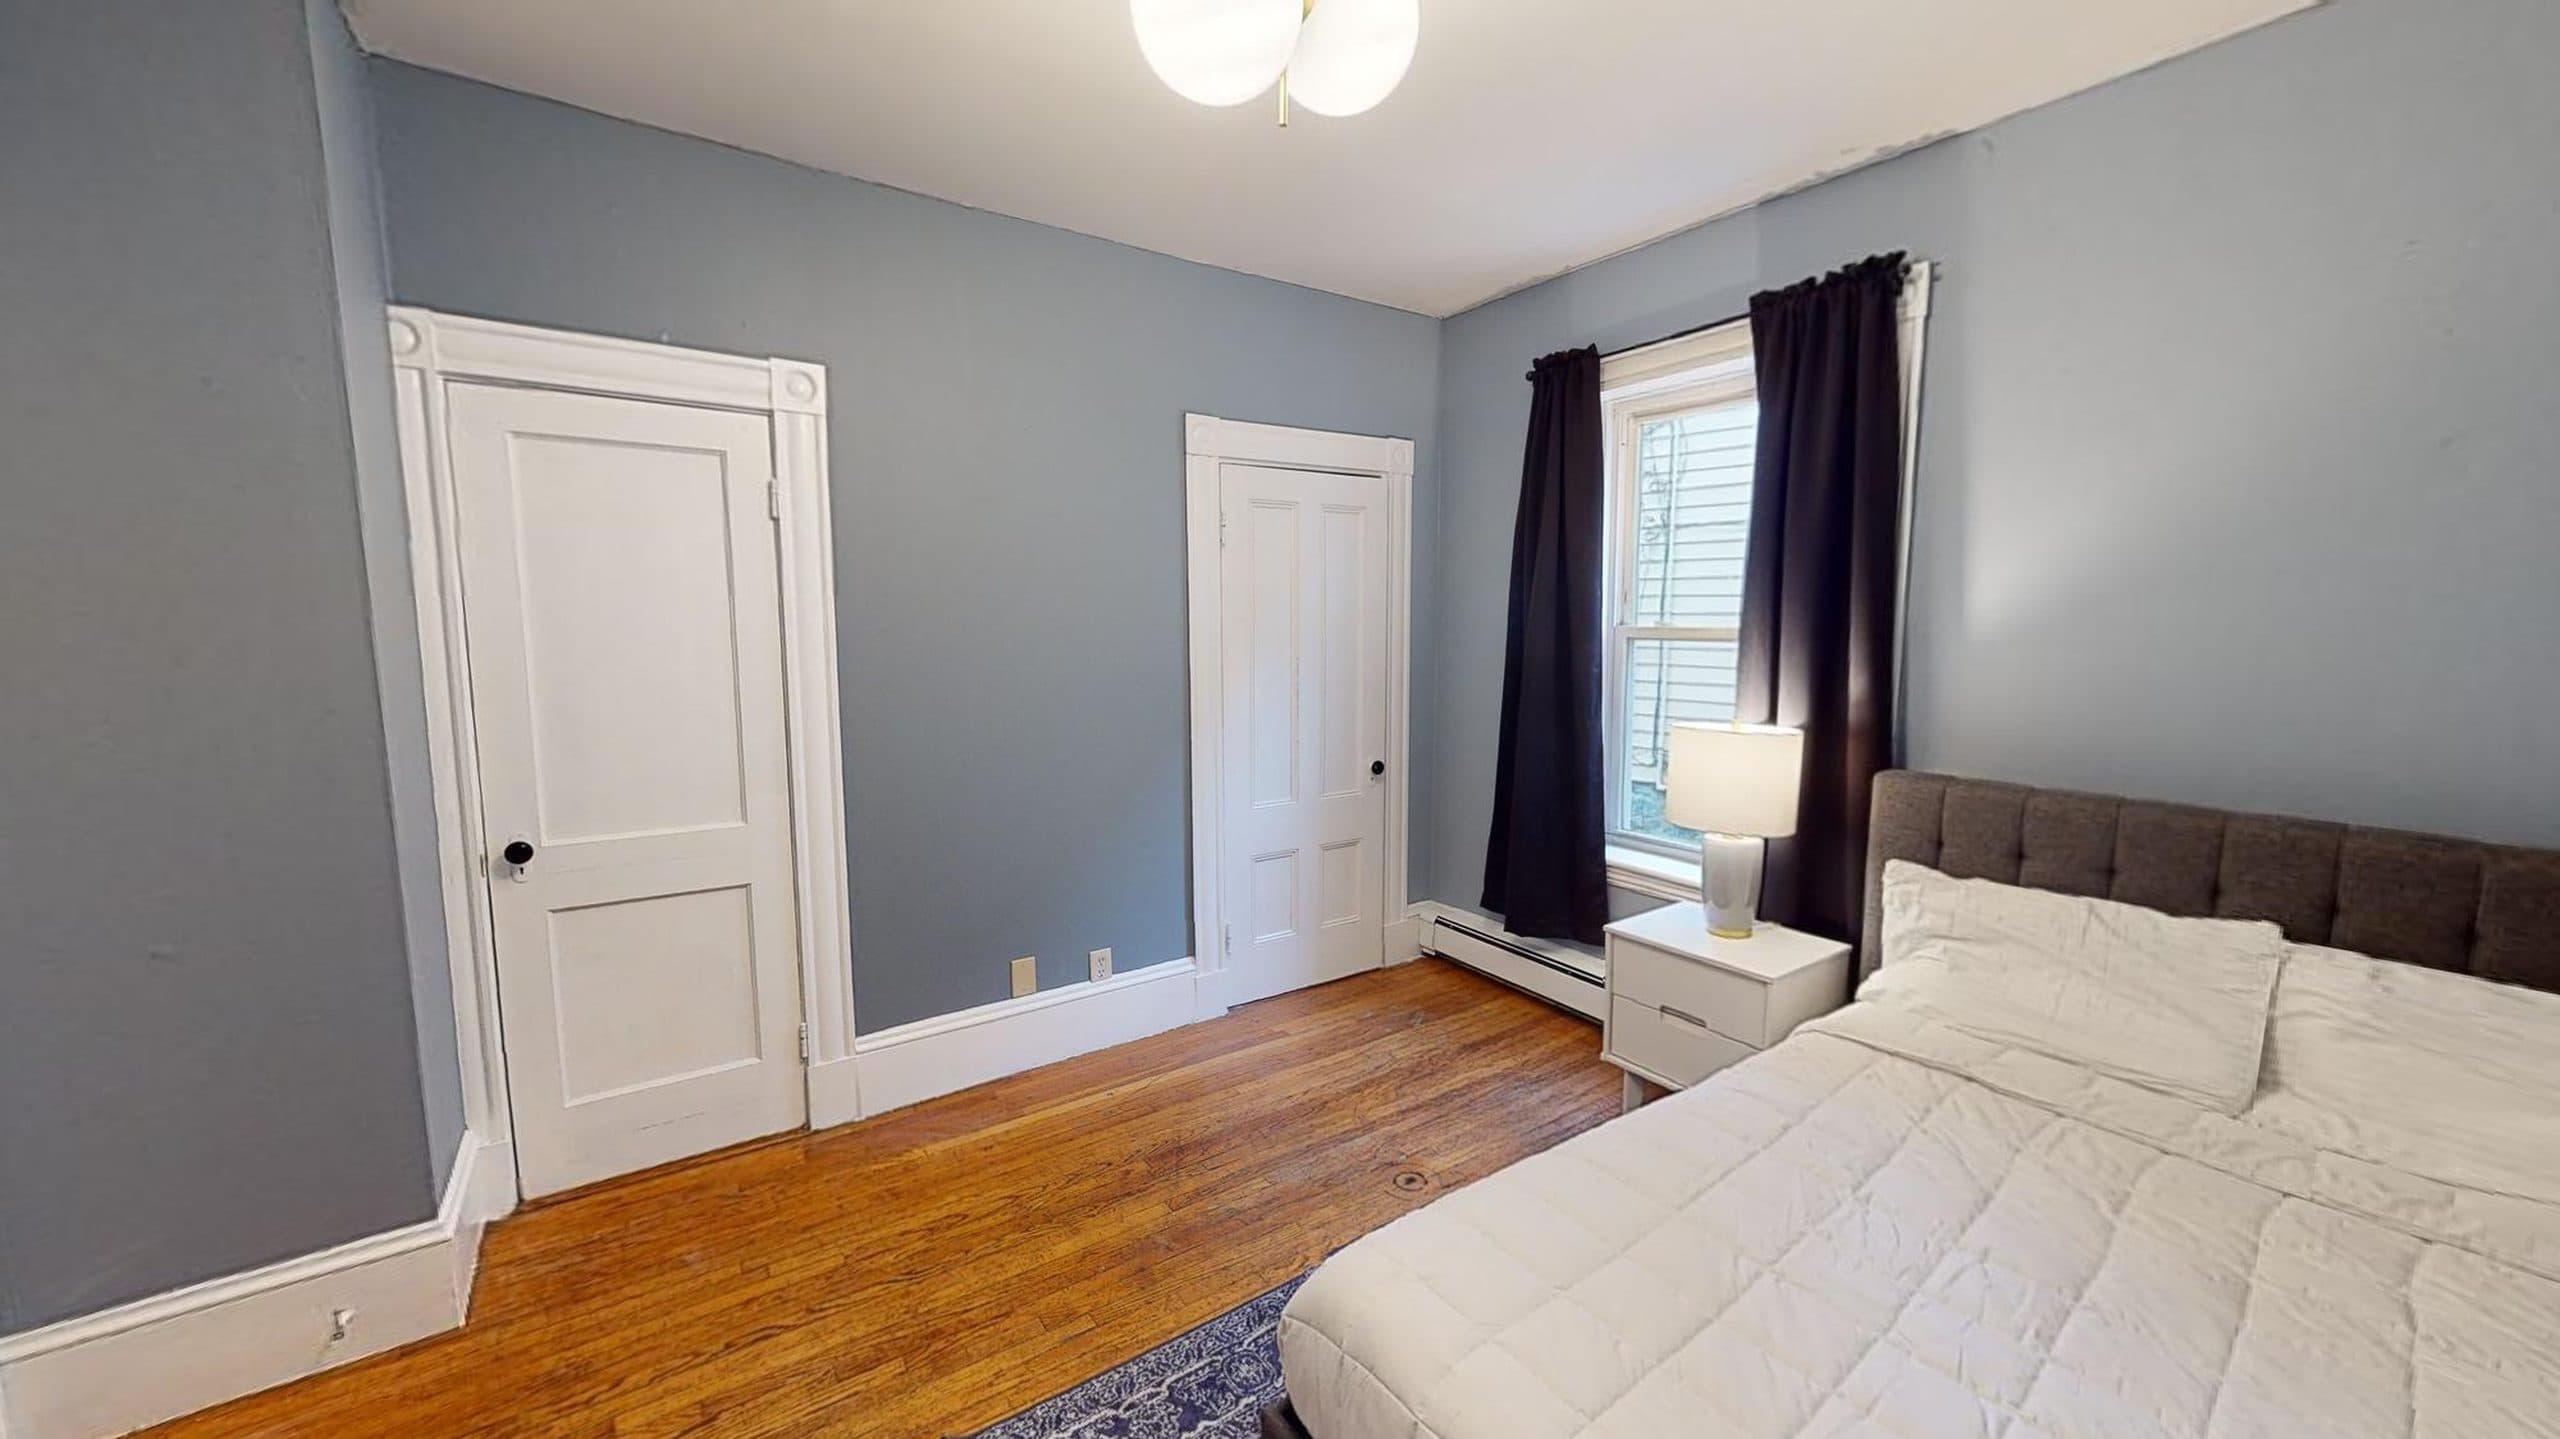 Photo 11 of #1126: Queen Bedroom A at June Homes